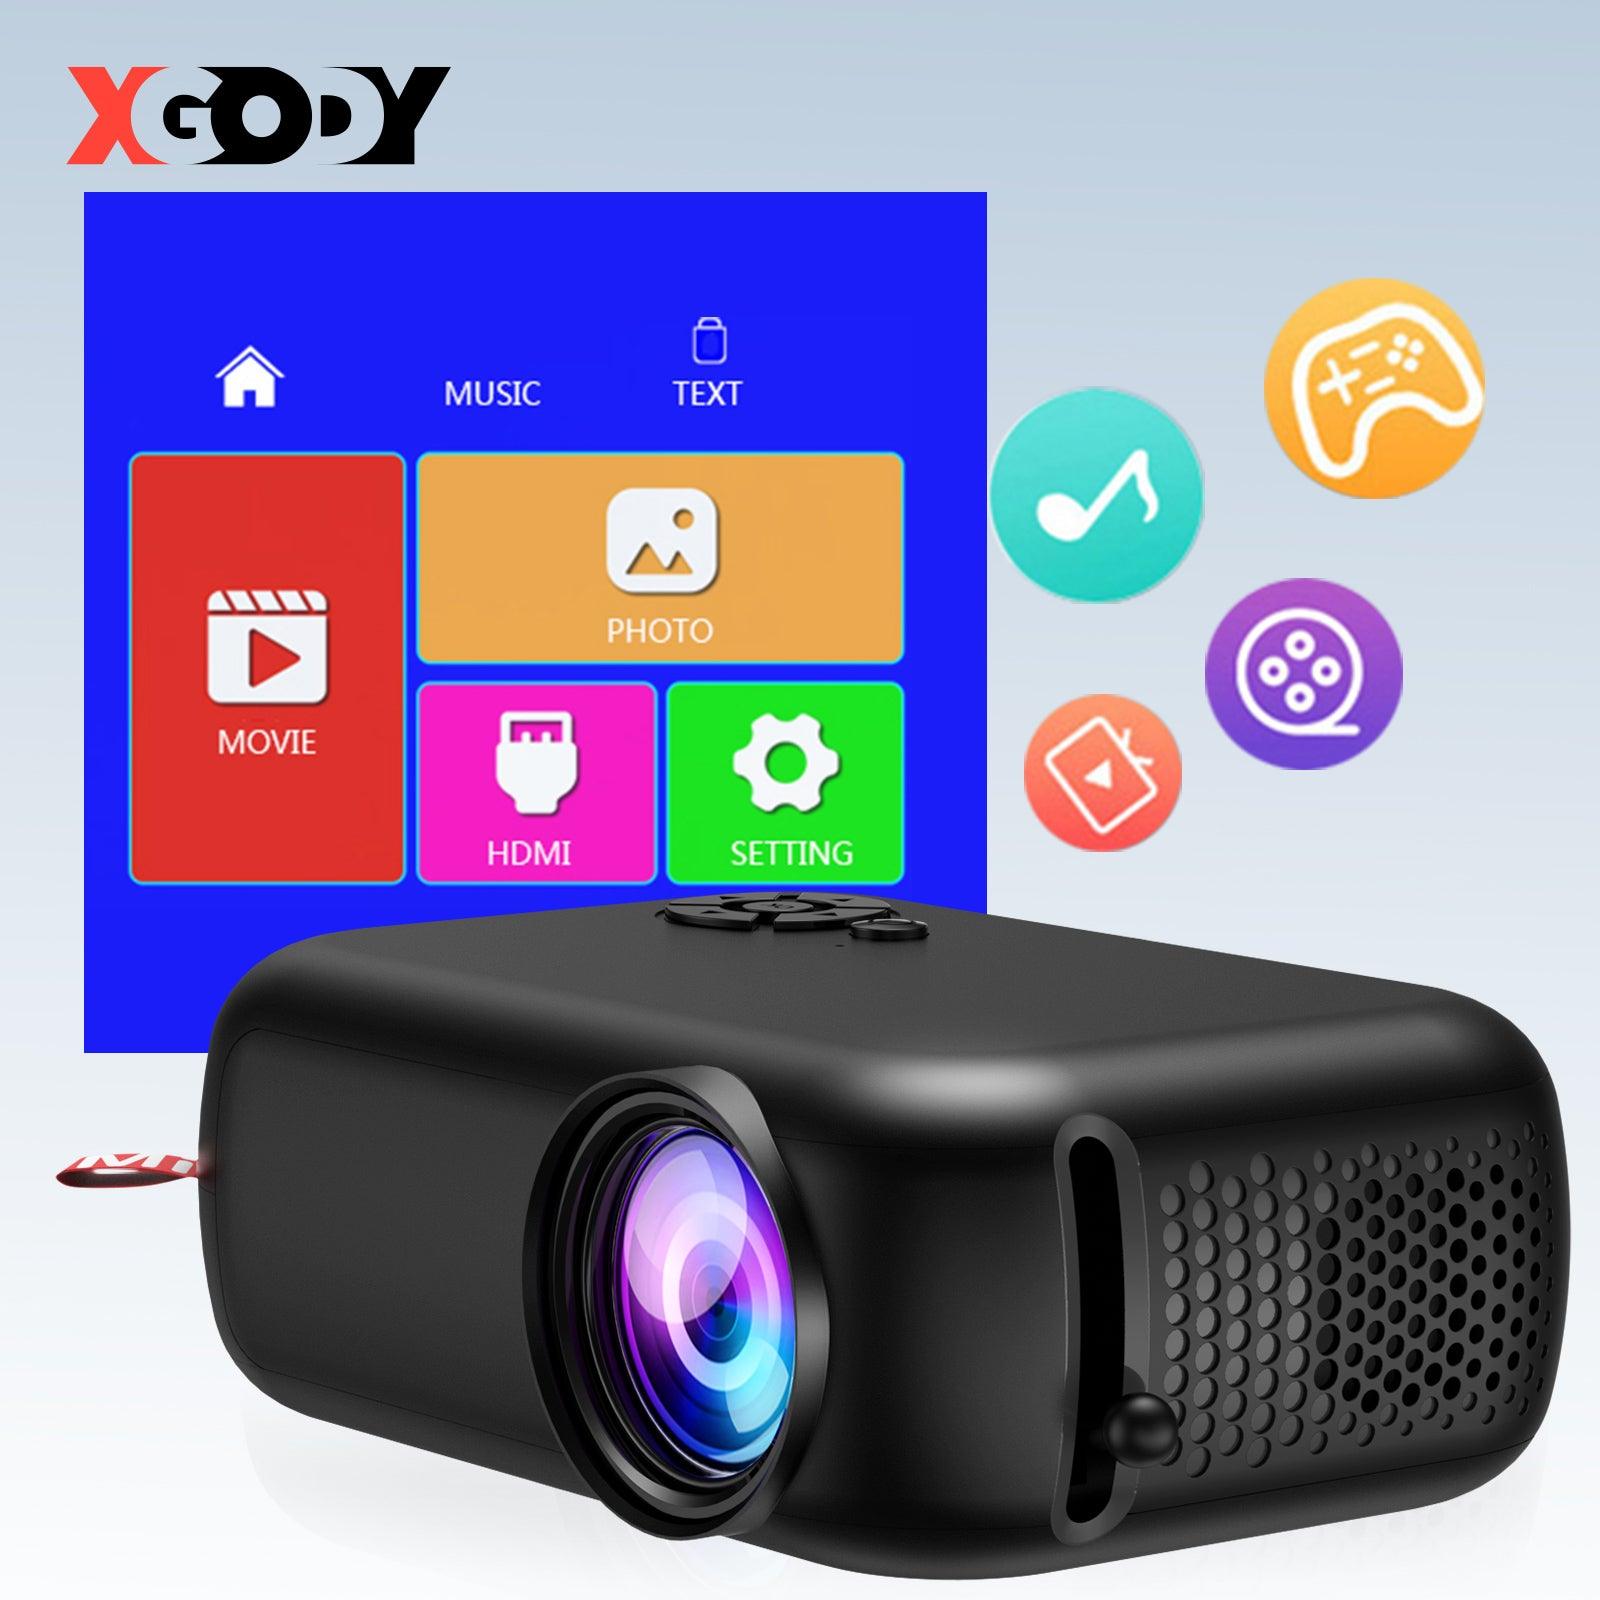 Cost-effective and Most worthwhile XGODY 1080P Multi-devio Connection Small Projector For Home Theater,  HIFI Built-In 3W Speaker - XGODY 